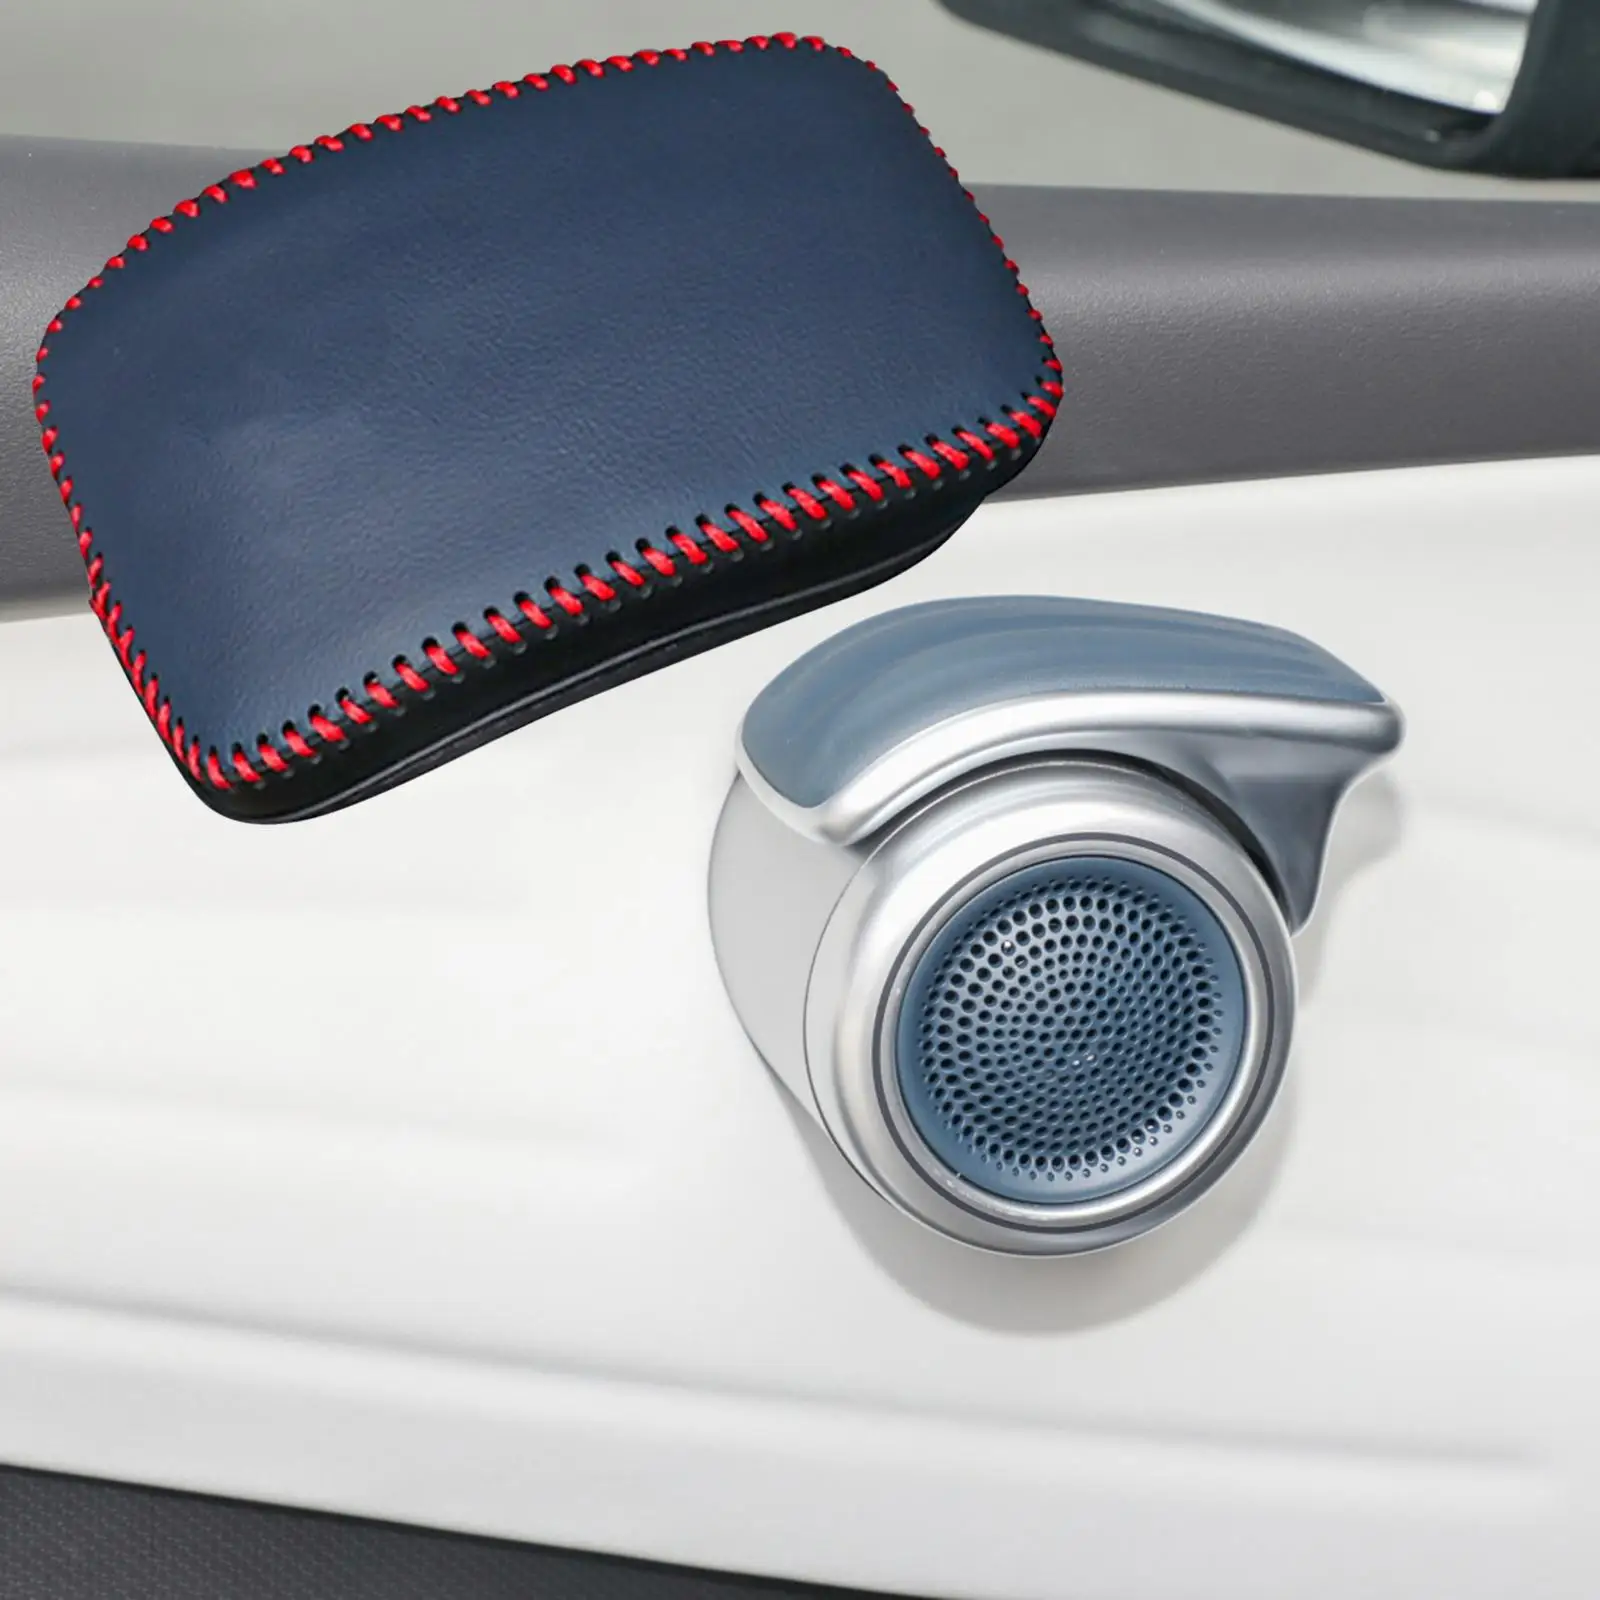 1x Auto Door Handle Protective Cover for Byd Yuan Plus Accessories Scratch Resistant